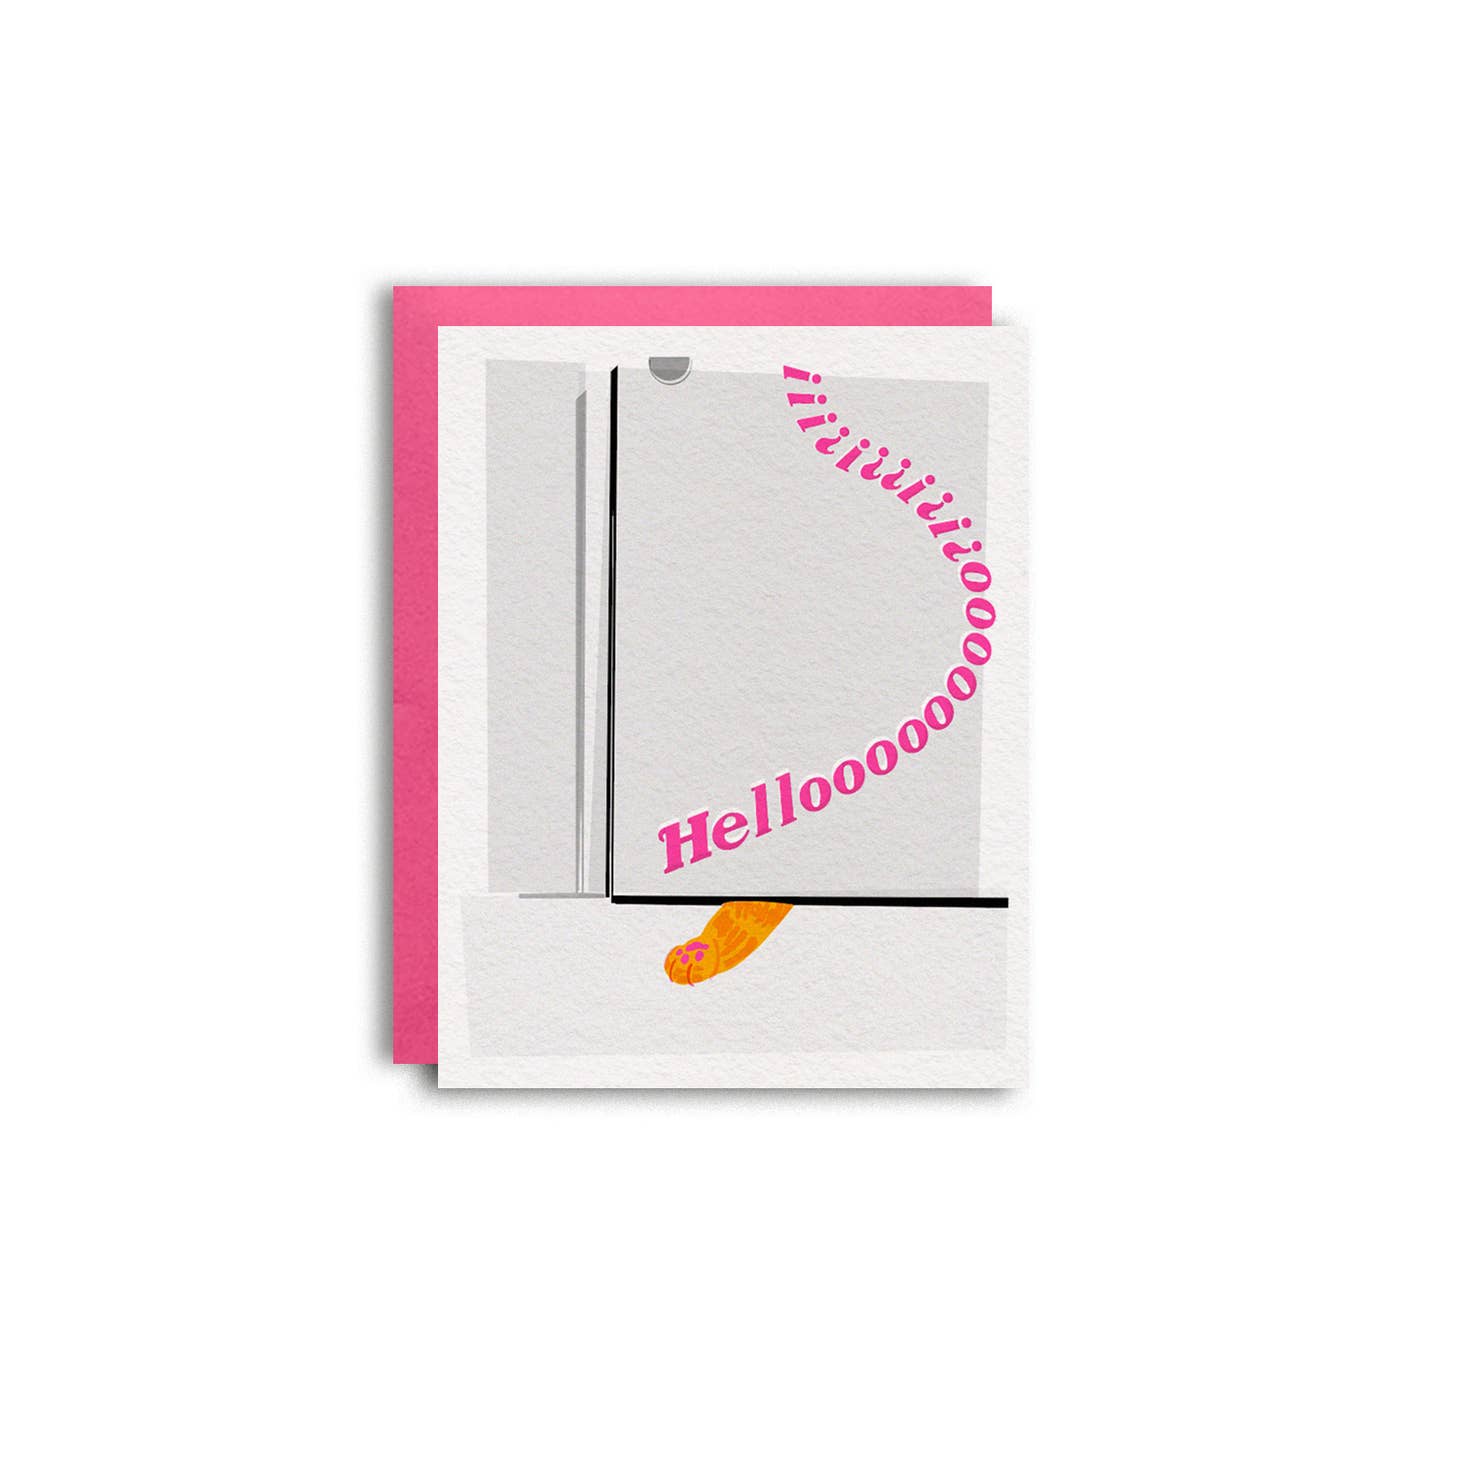 White background with image of a door with an orange cat paw underneath and bright pink text says, “Helloooooooo?!?!?!?!?!?!?”. Pink envelope included.        